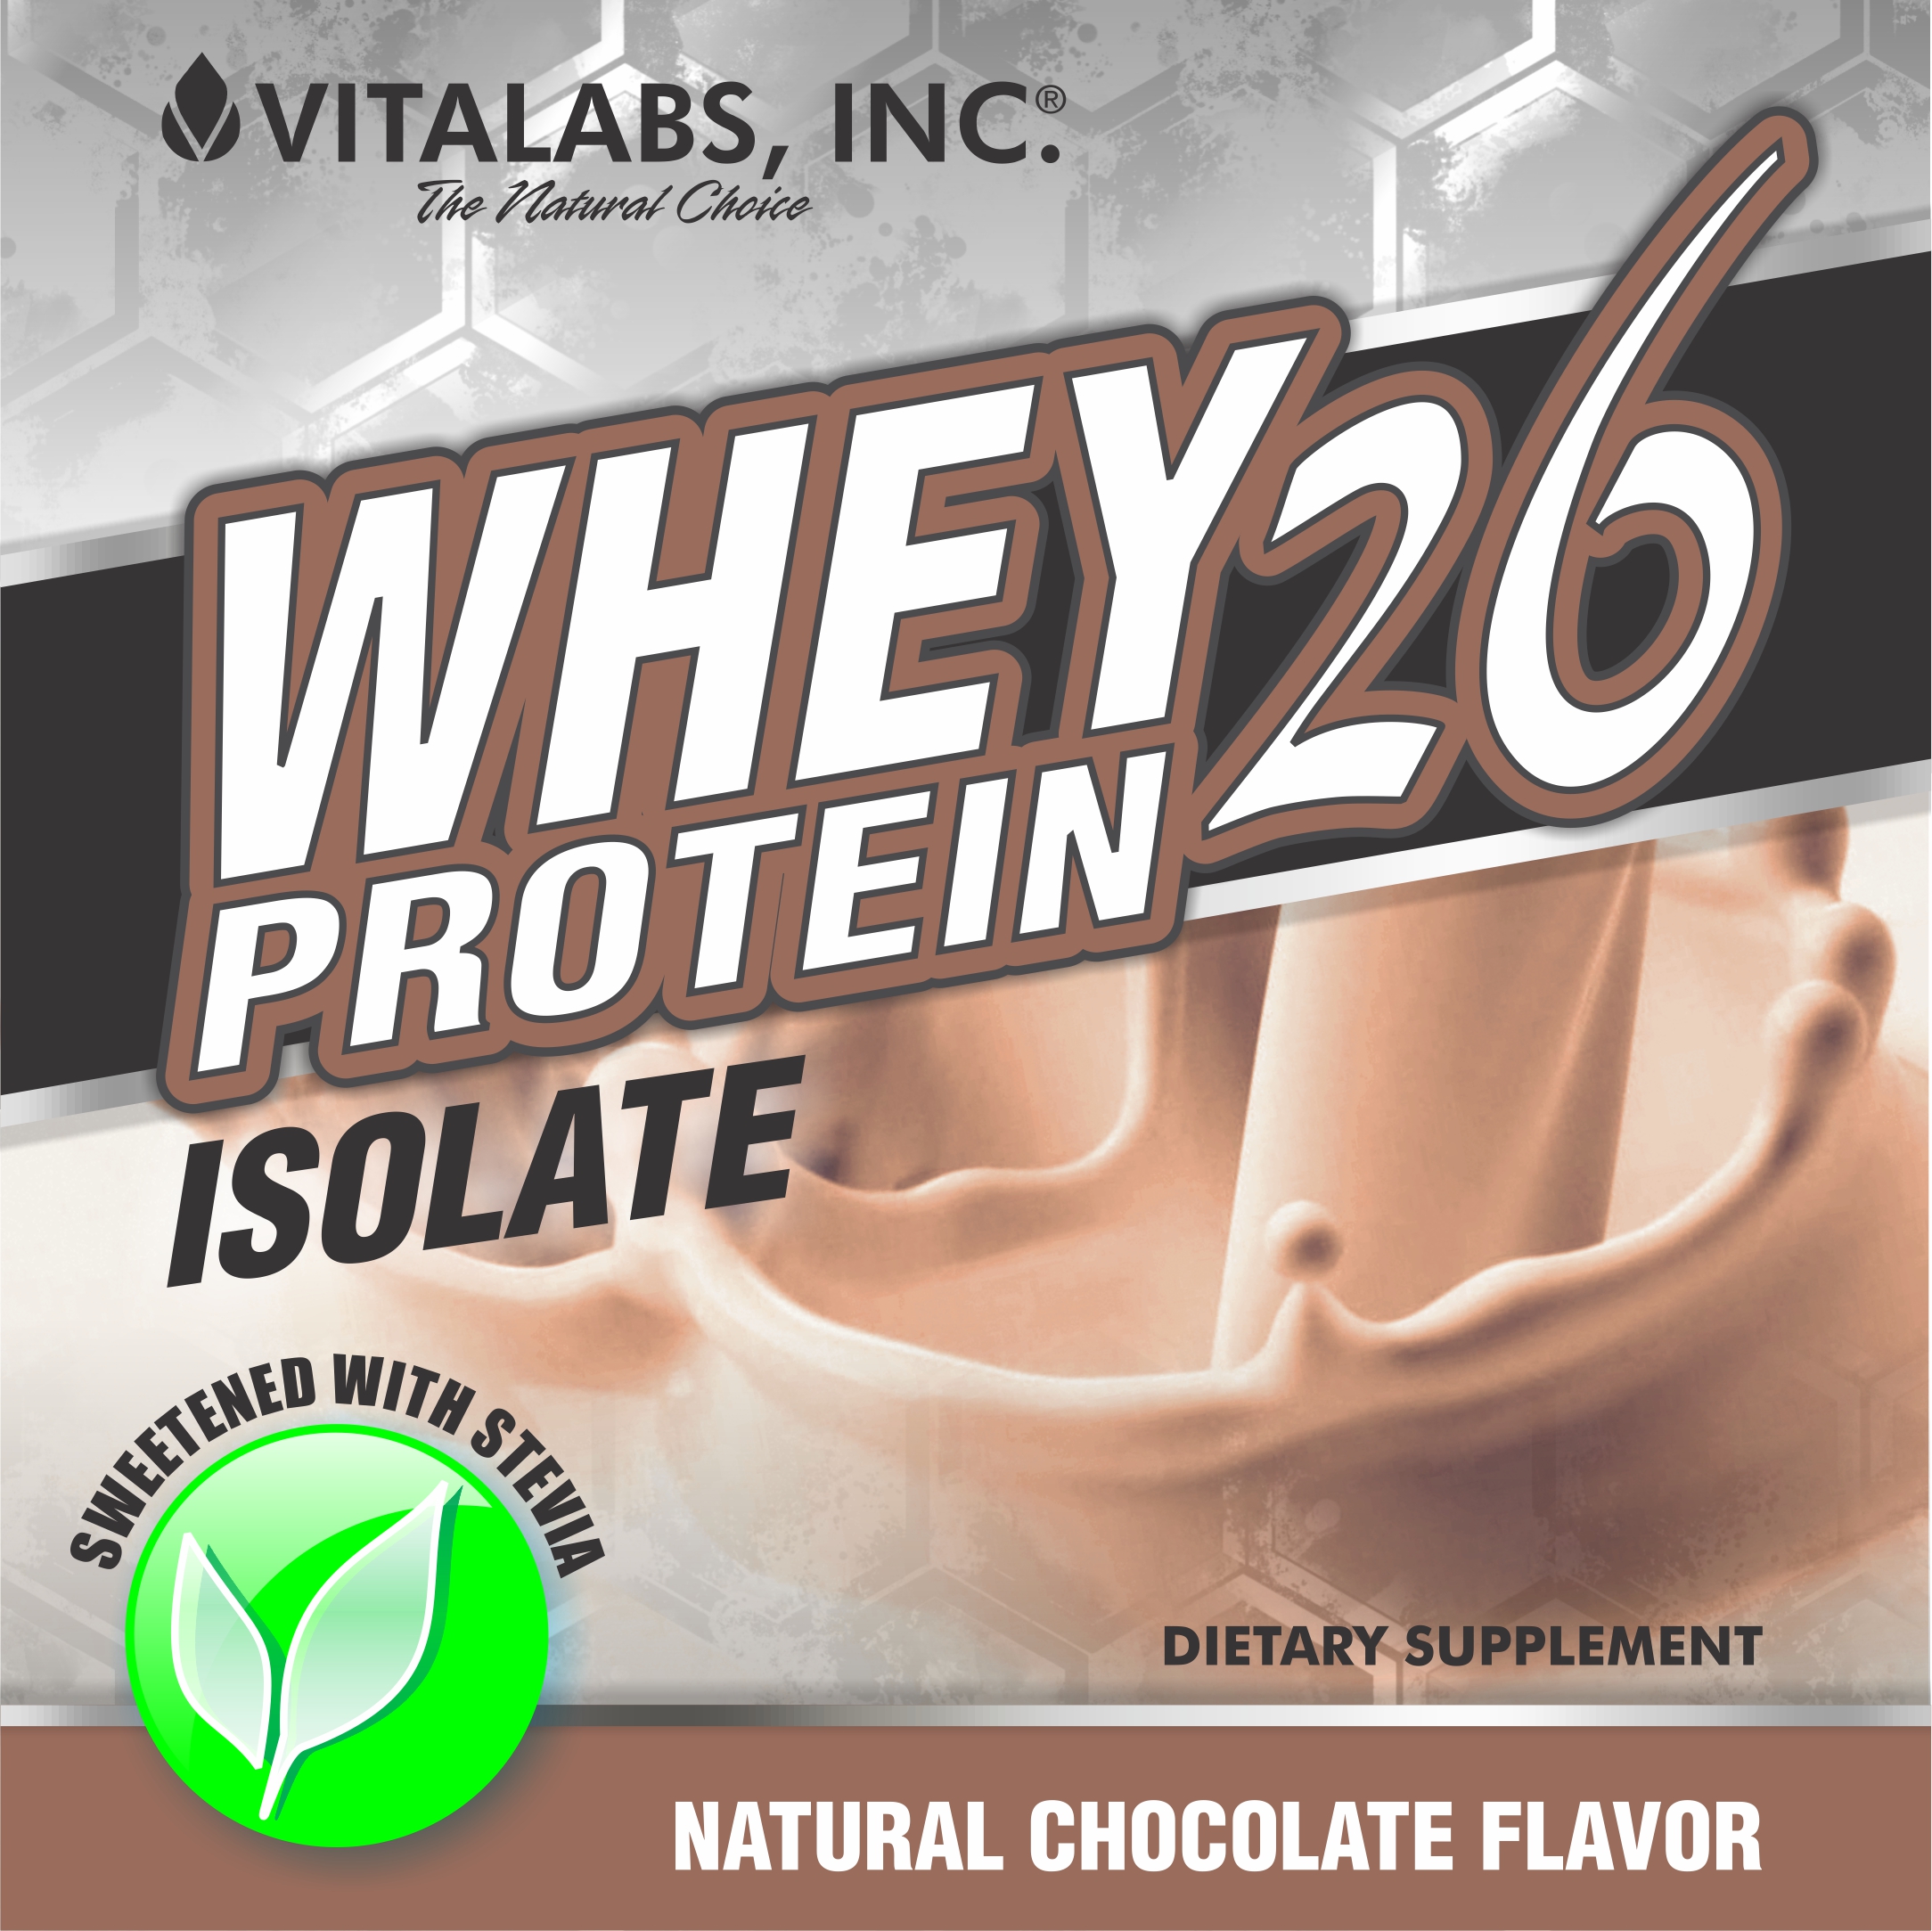 Whey-26 Chocolate [DISCONTINUED]